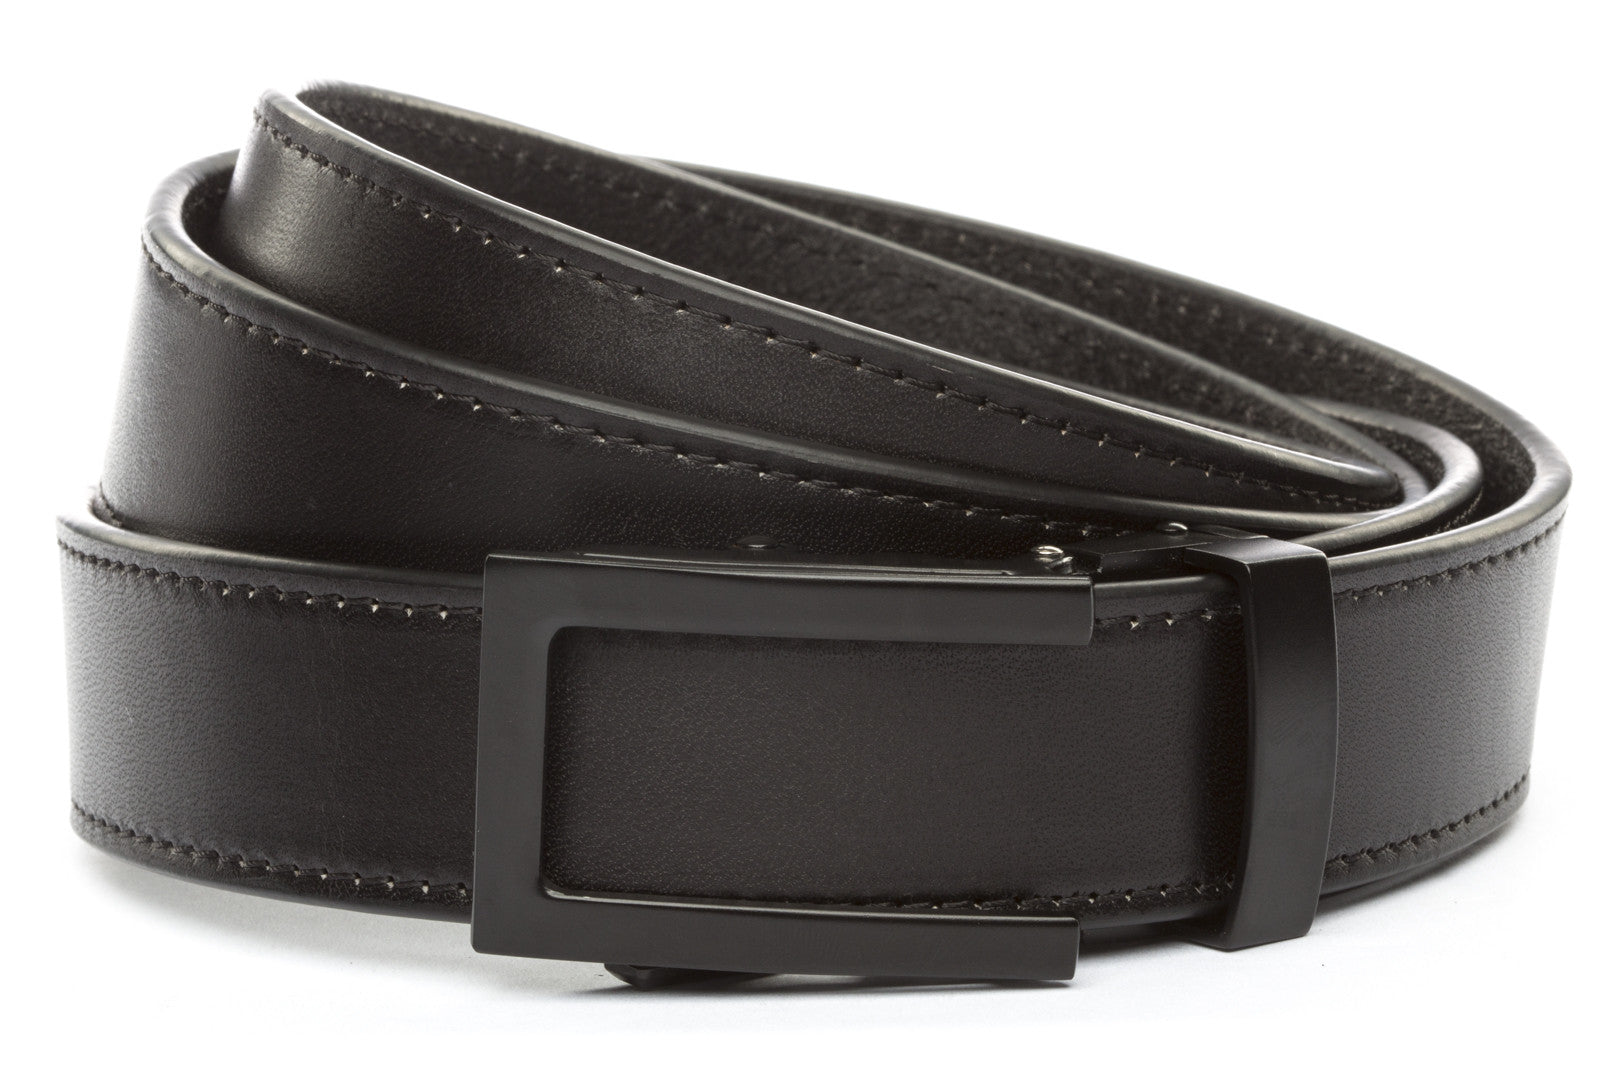 Black Vegetable Tanned Leather w/Traditional in Black Buckle (1.25") - Anson Belt & Buckle